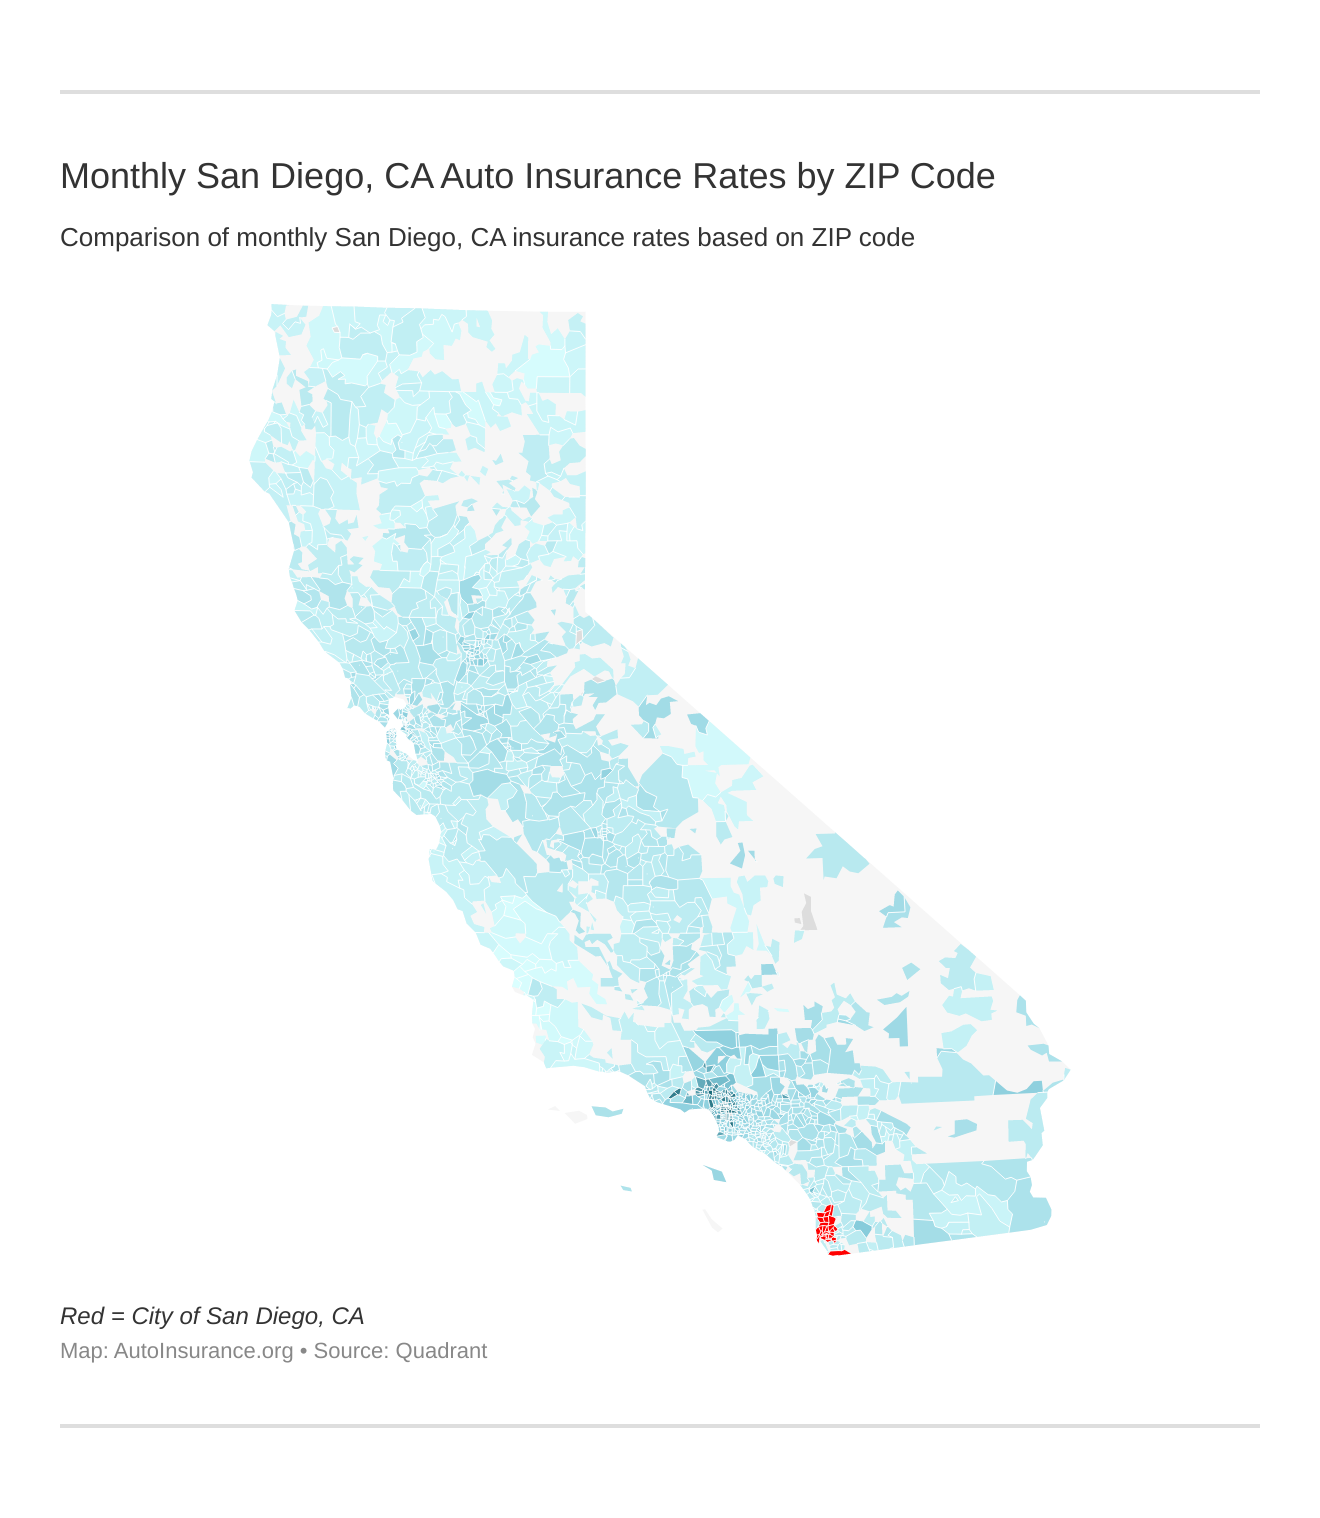 Monthly San Diego, CA Auto Insurance Rates by ZIP Code